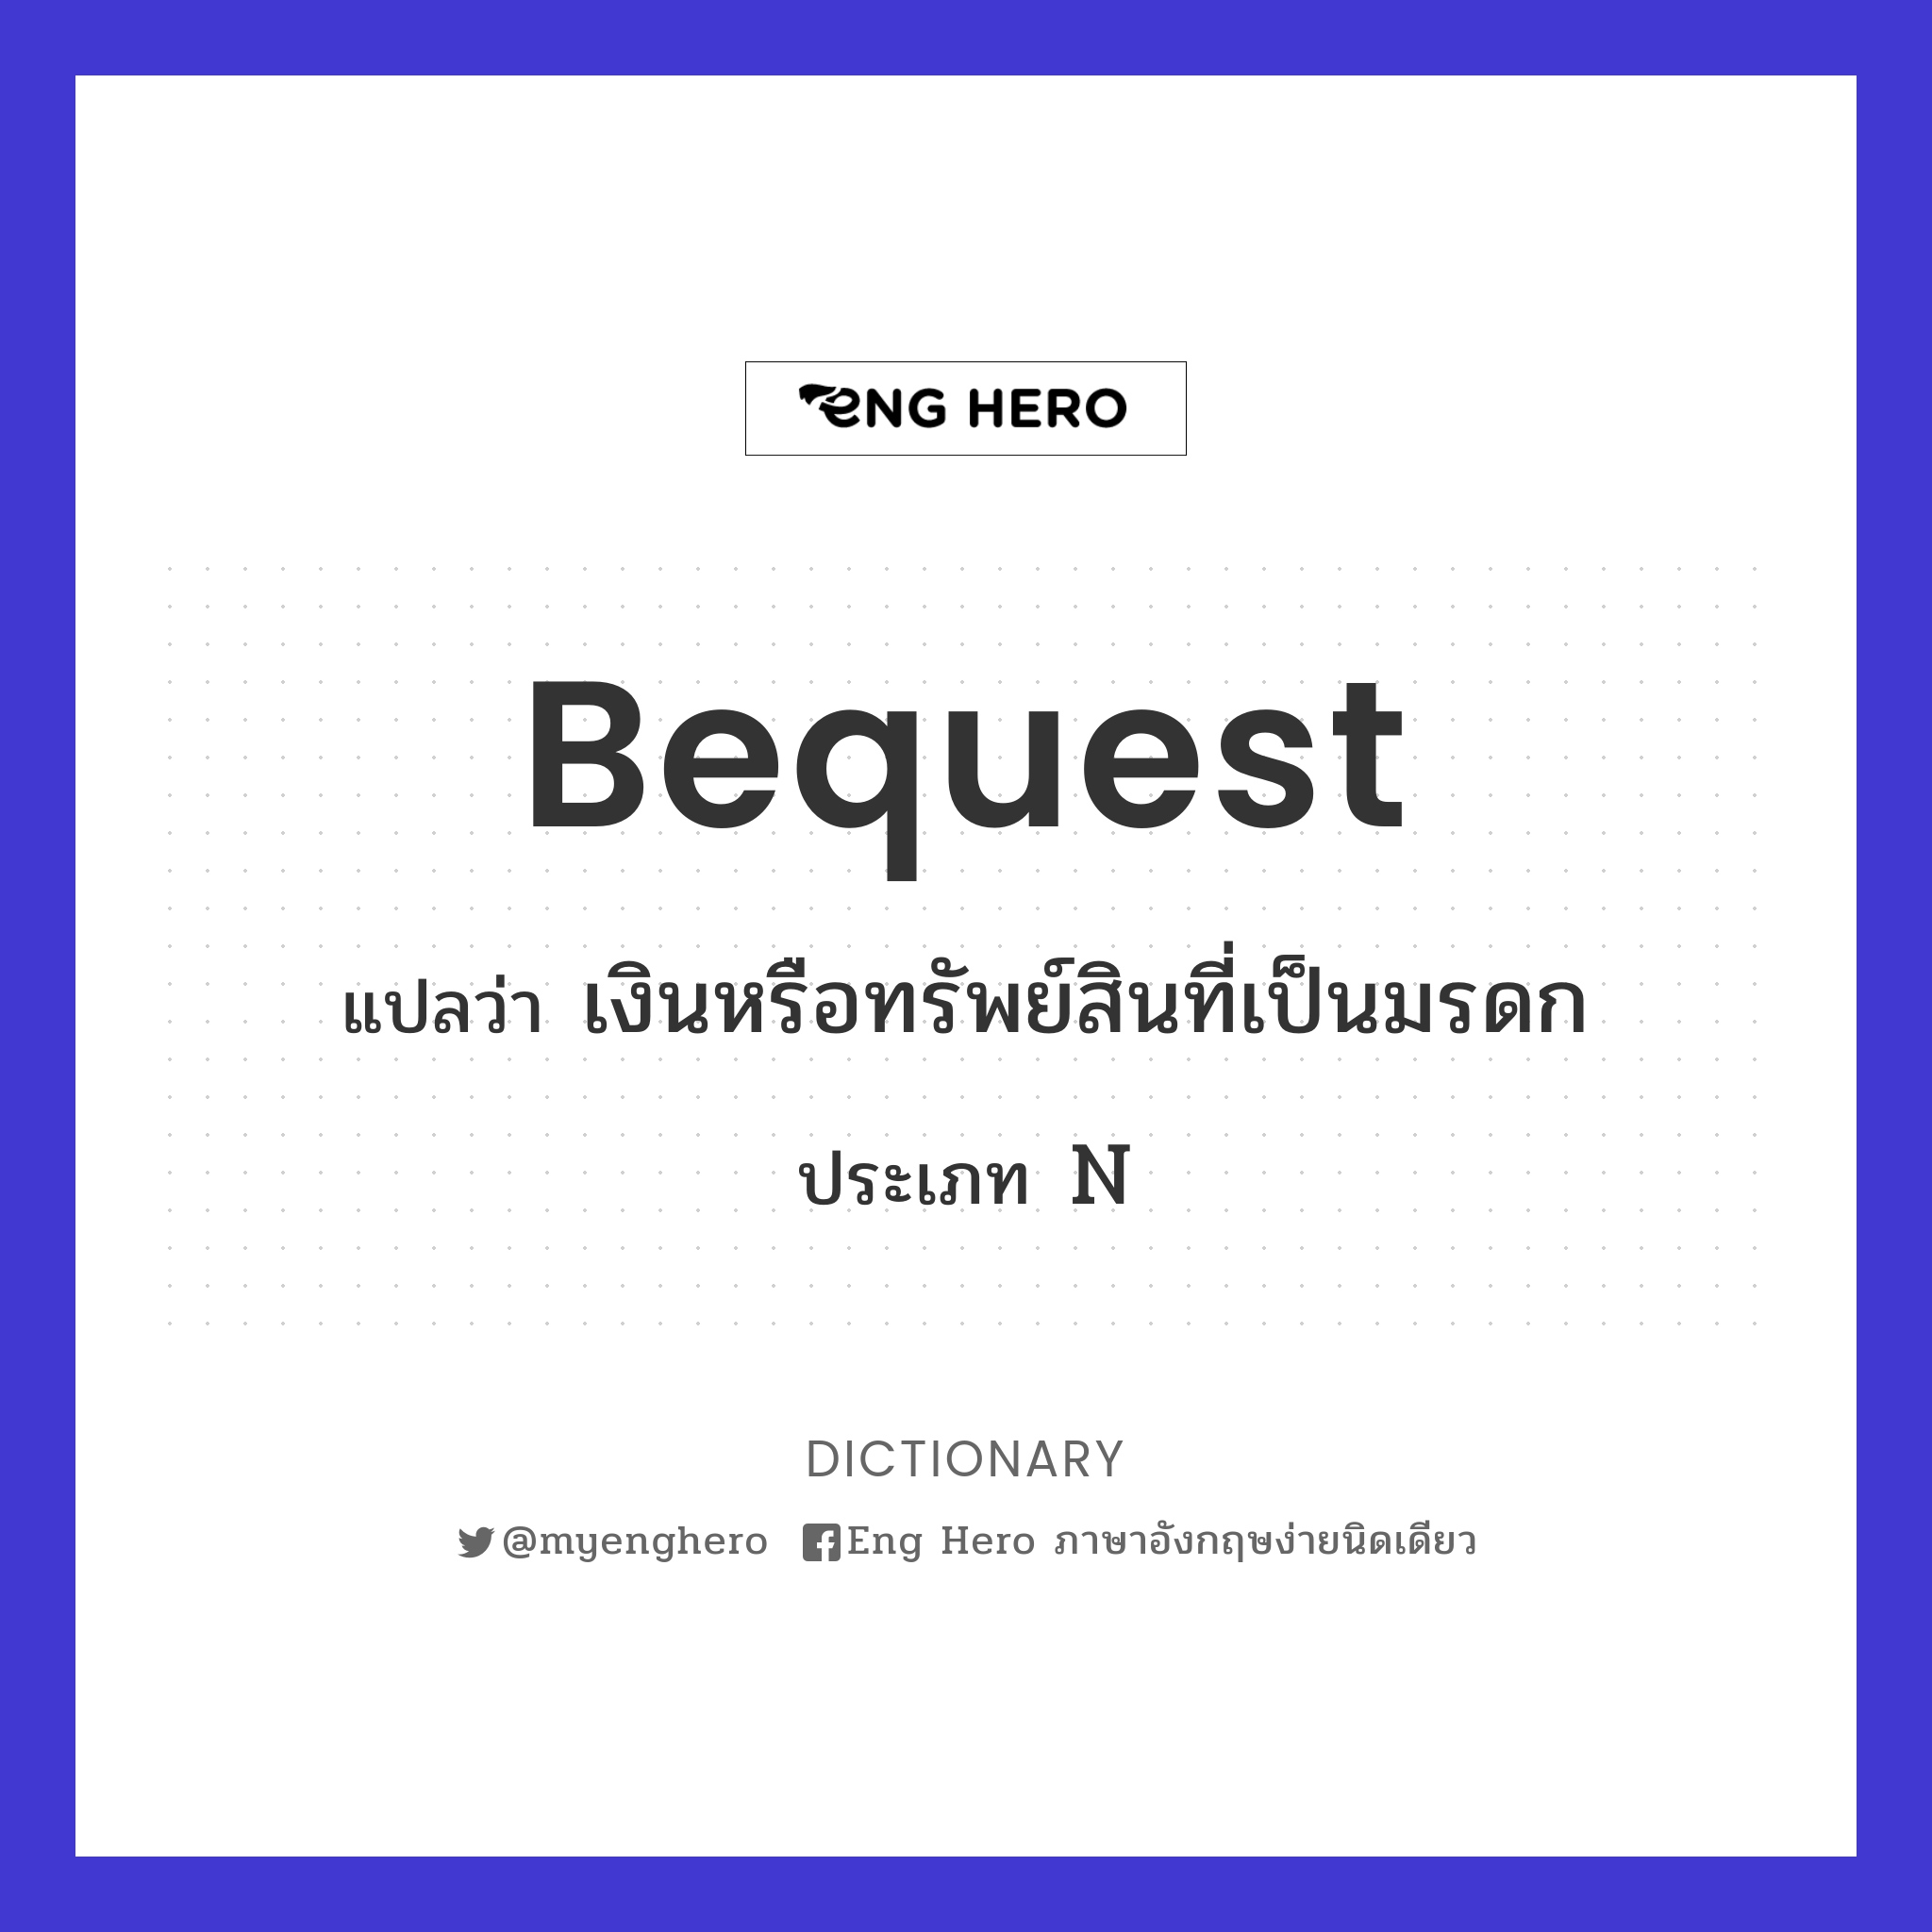 bequest